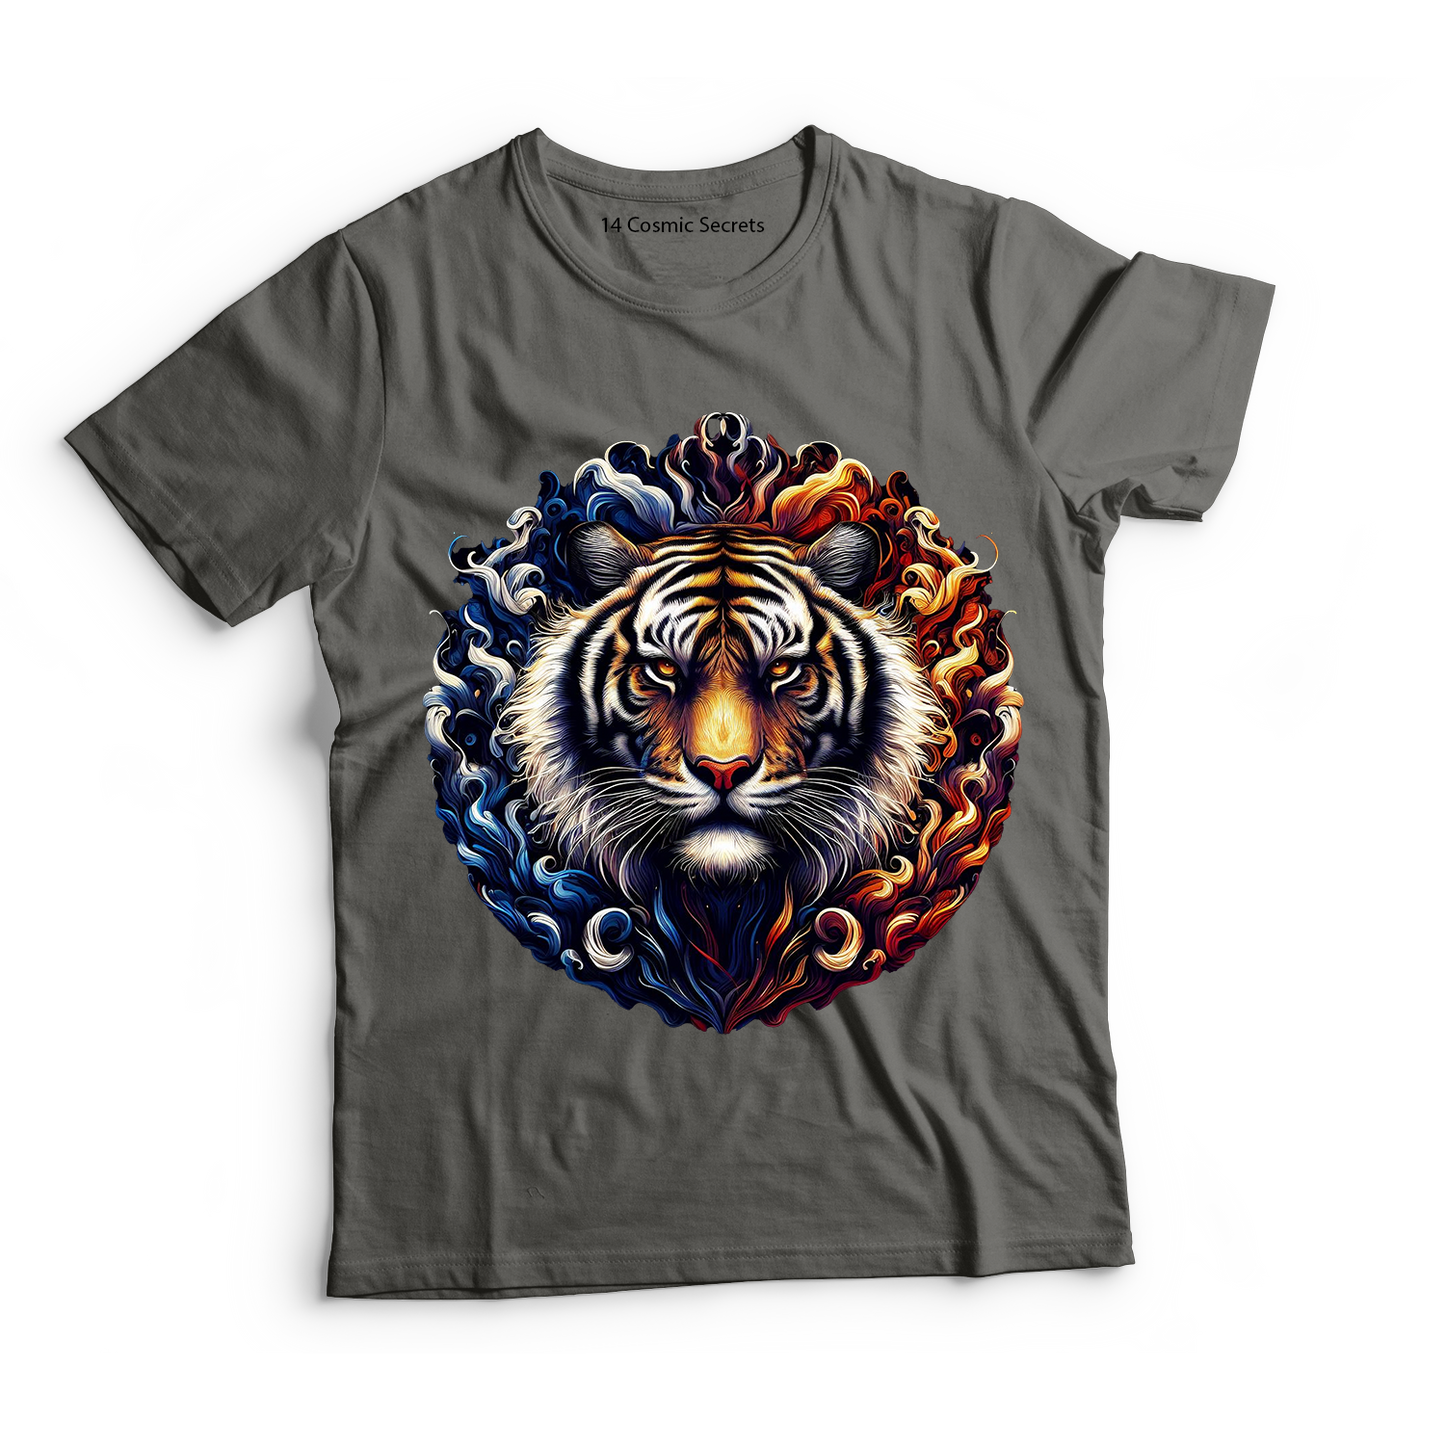 Tiger's Realm Fashion Graphic Printed T-Shirt  Cotton T-Shirt Magnificence of India T-Shirt